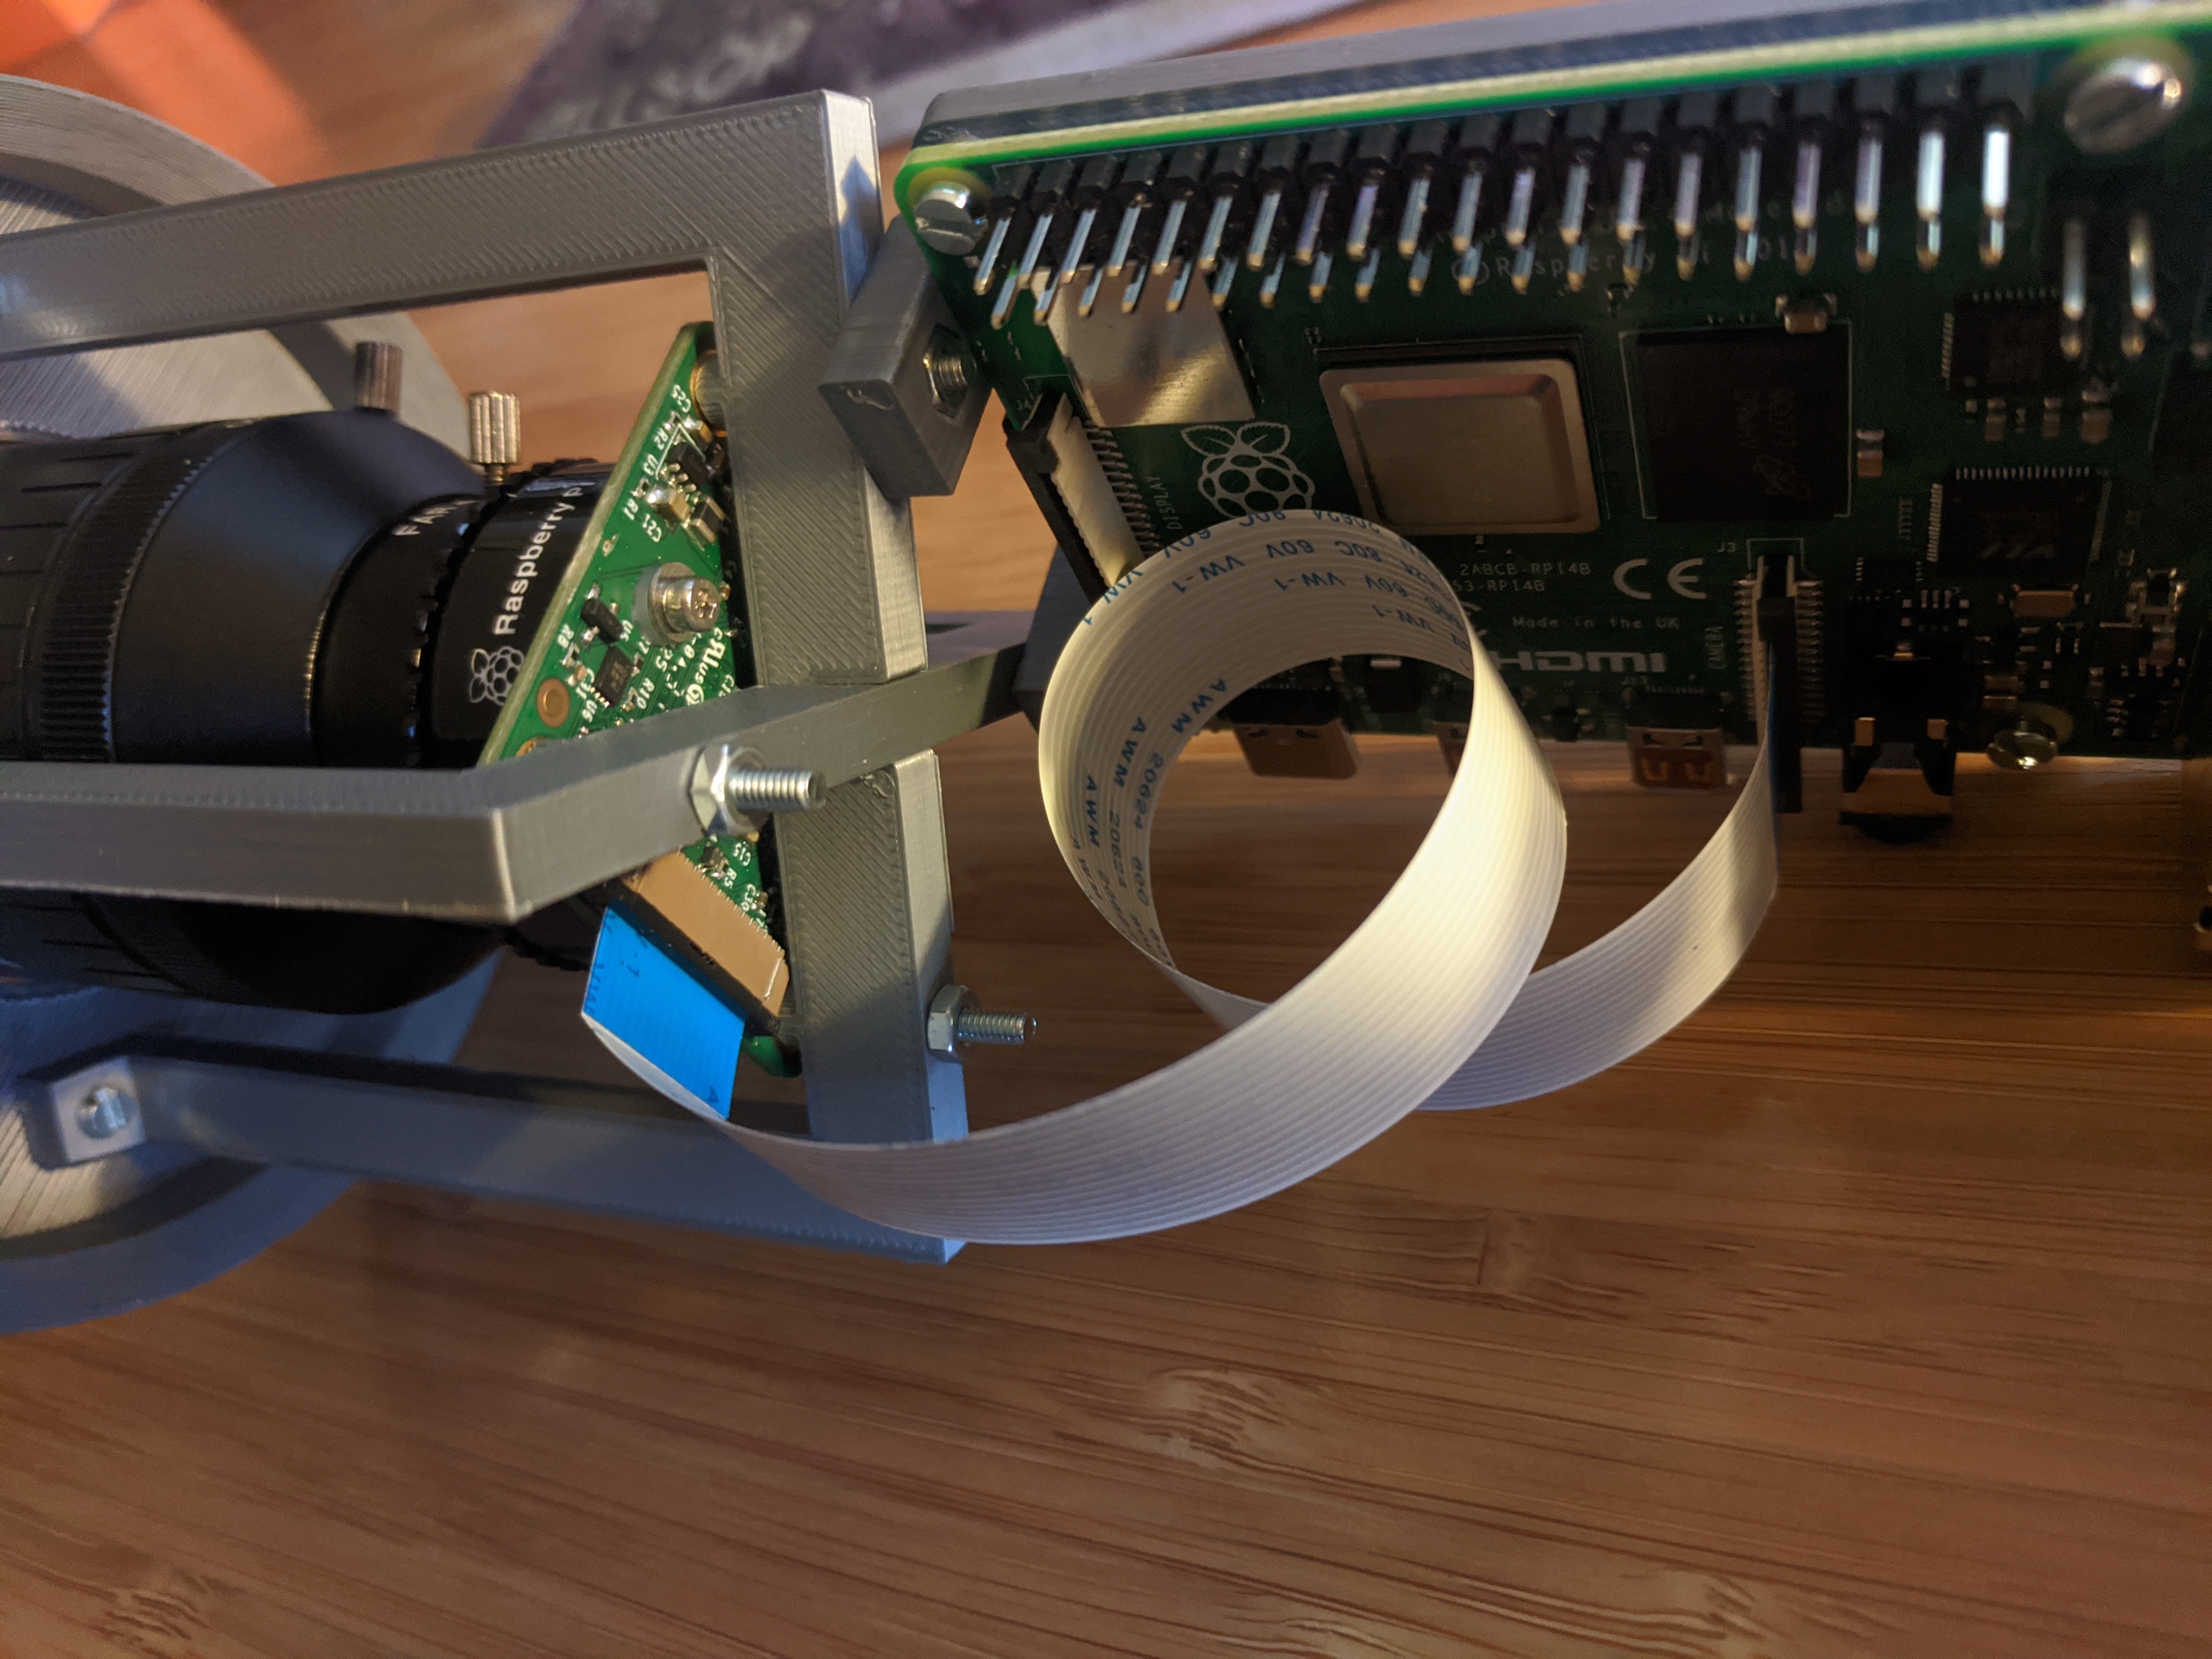 Camera support assembly attached to Raspberry Pi support structure